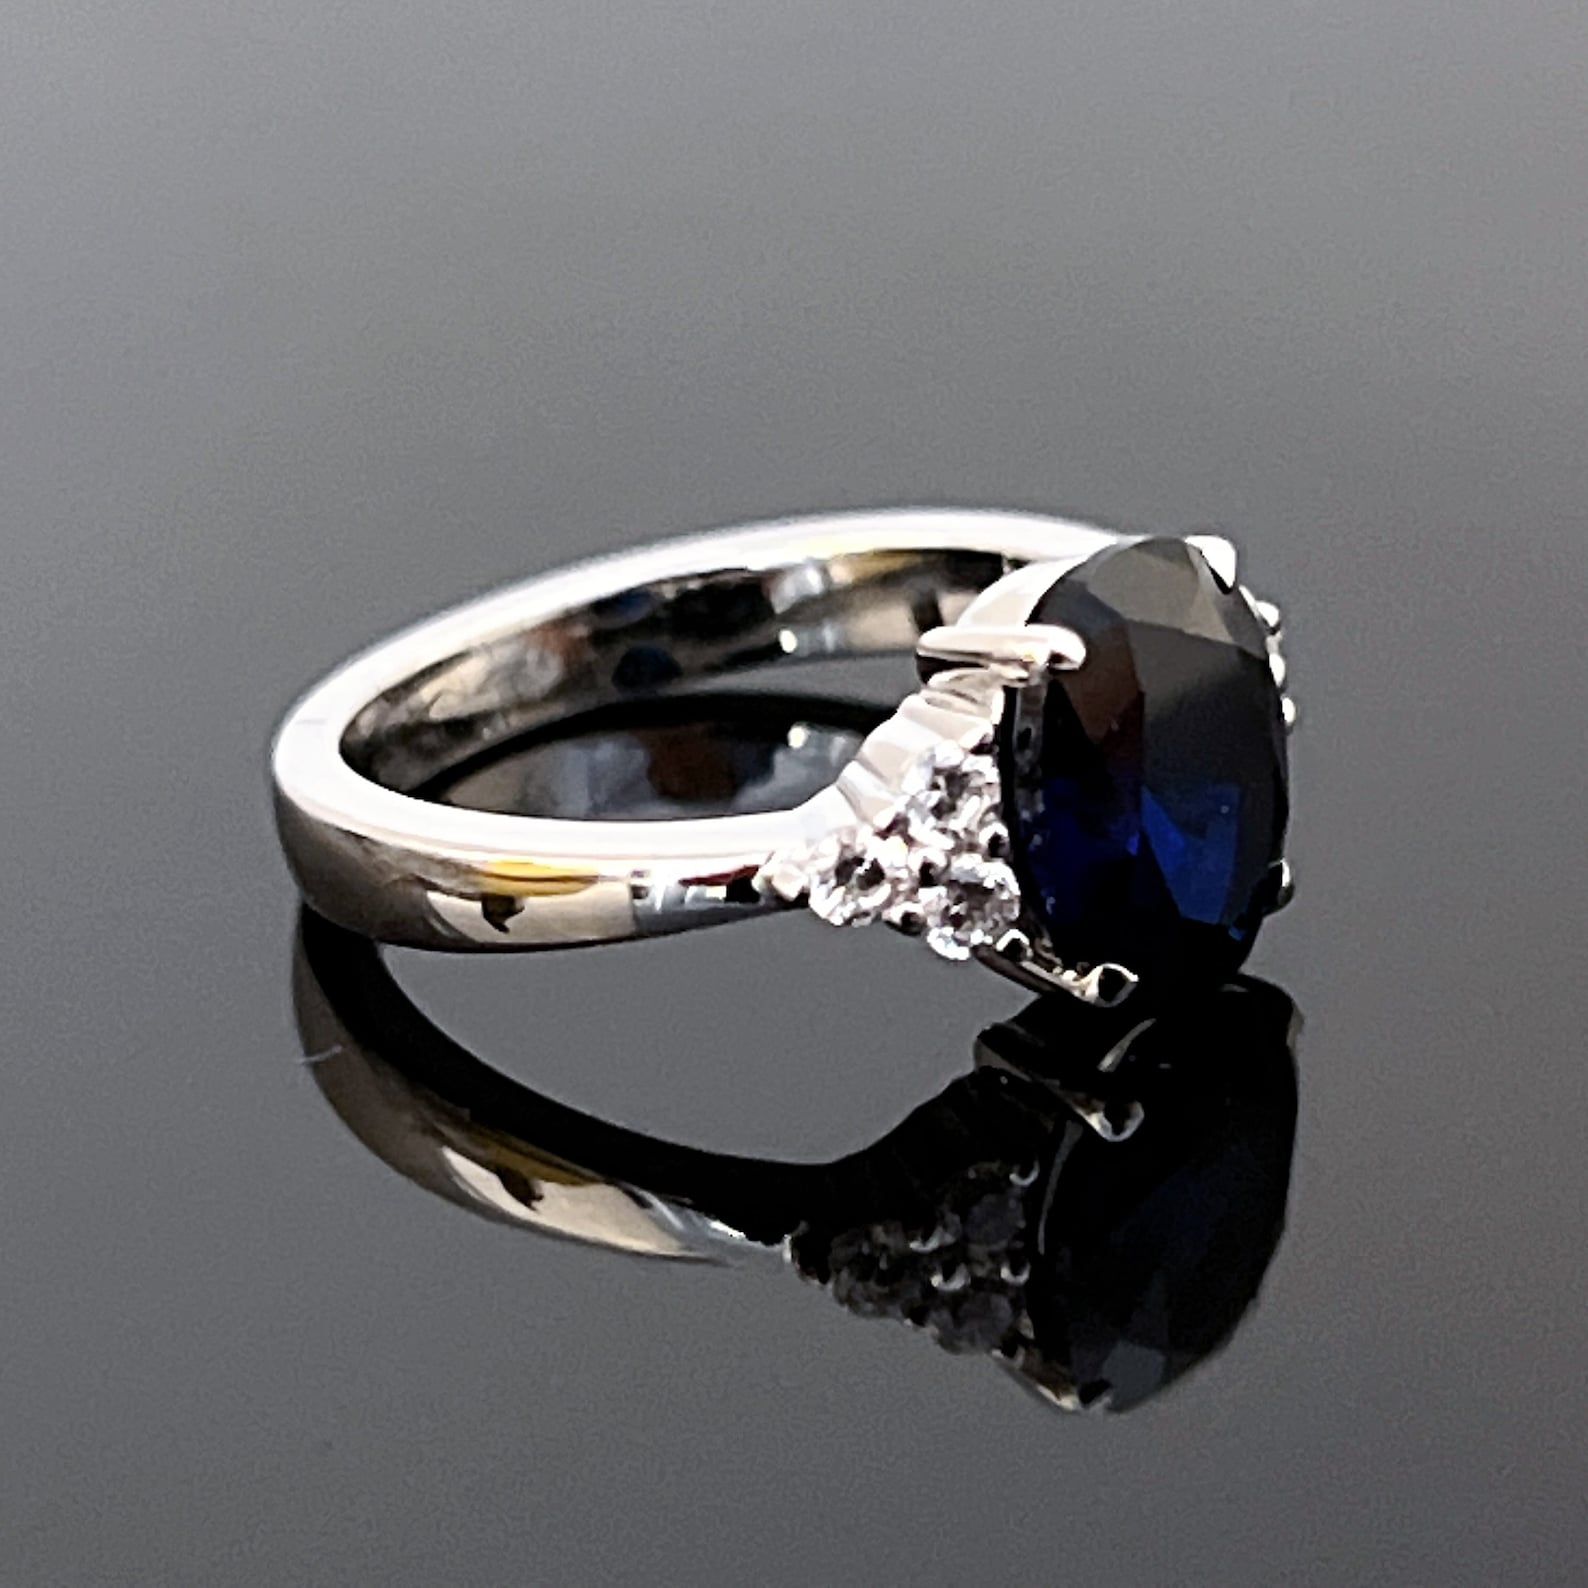 LEA Blue Sapphire Ring Sterling Silver Ring Sapphire - Etsy